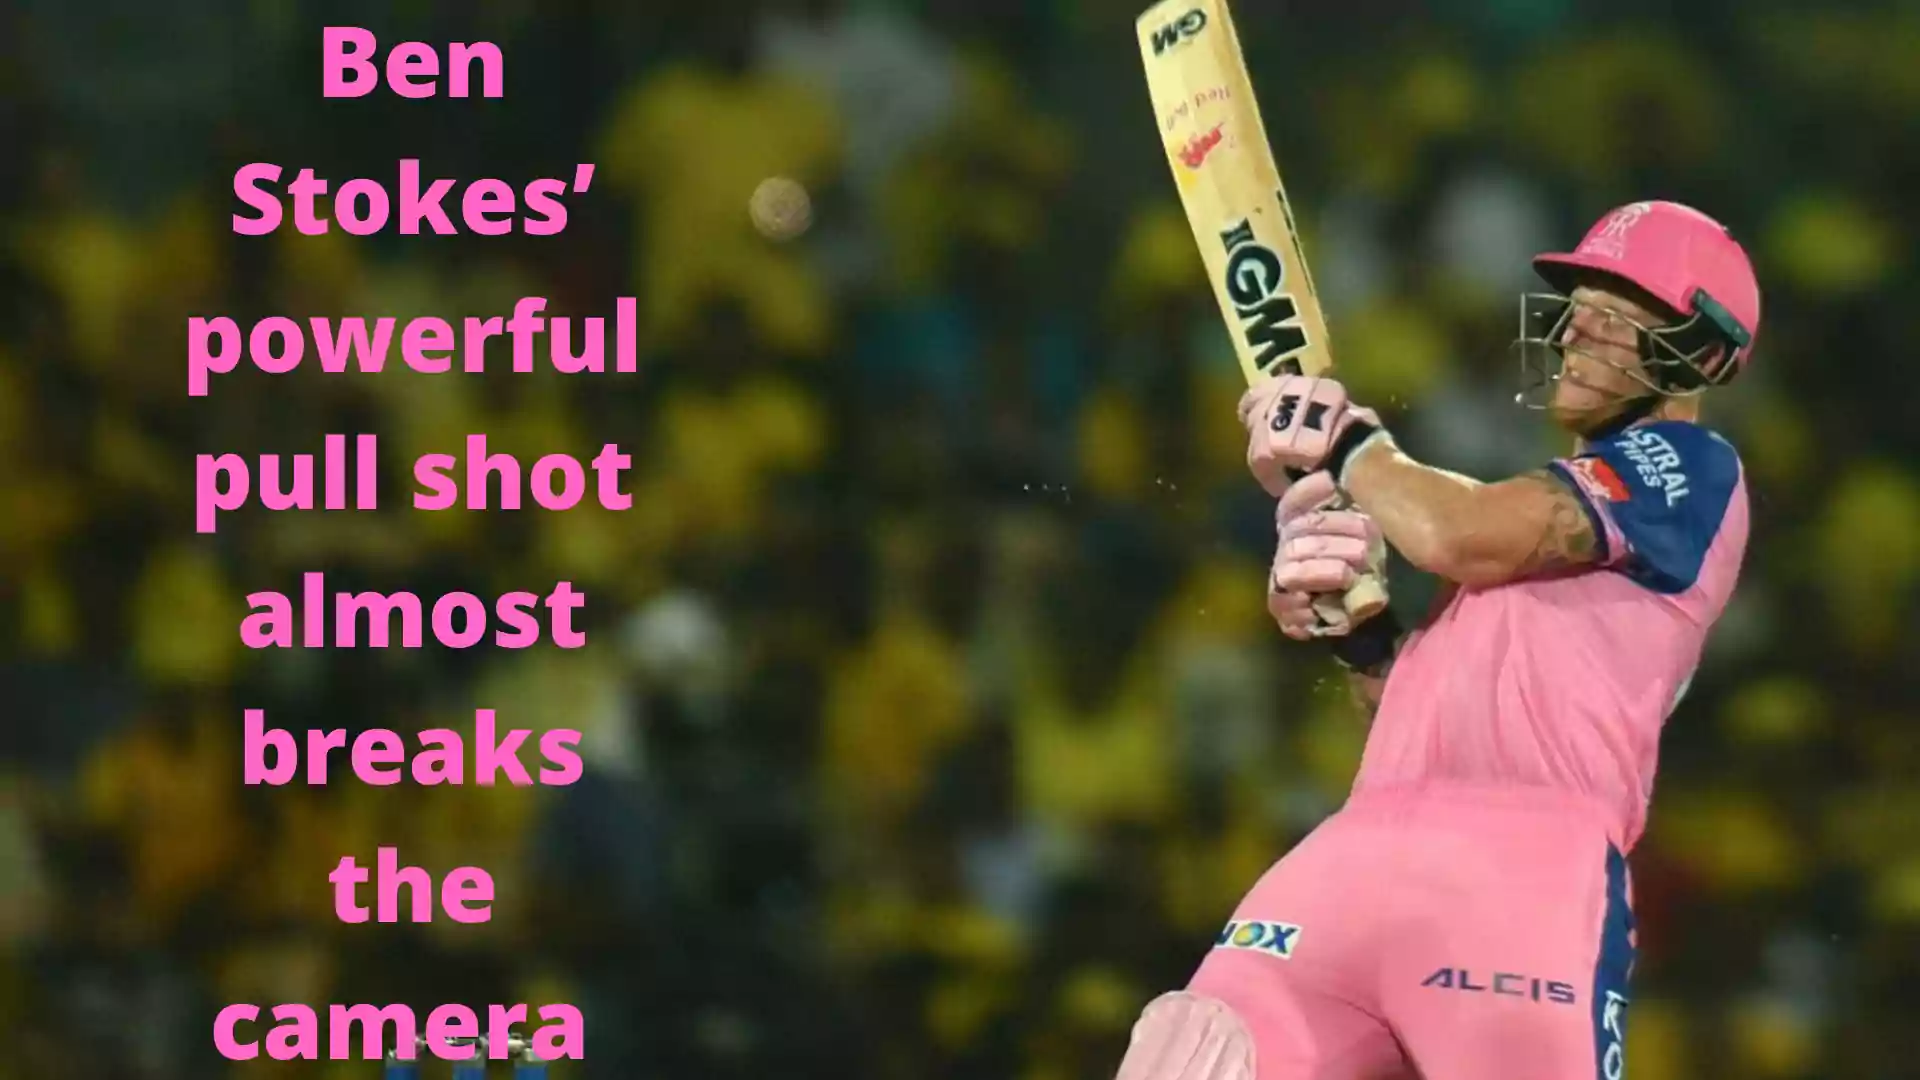 Ben Stokes’ powerful pull shot almost breaks the camera